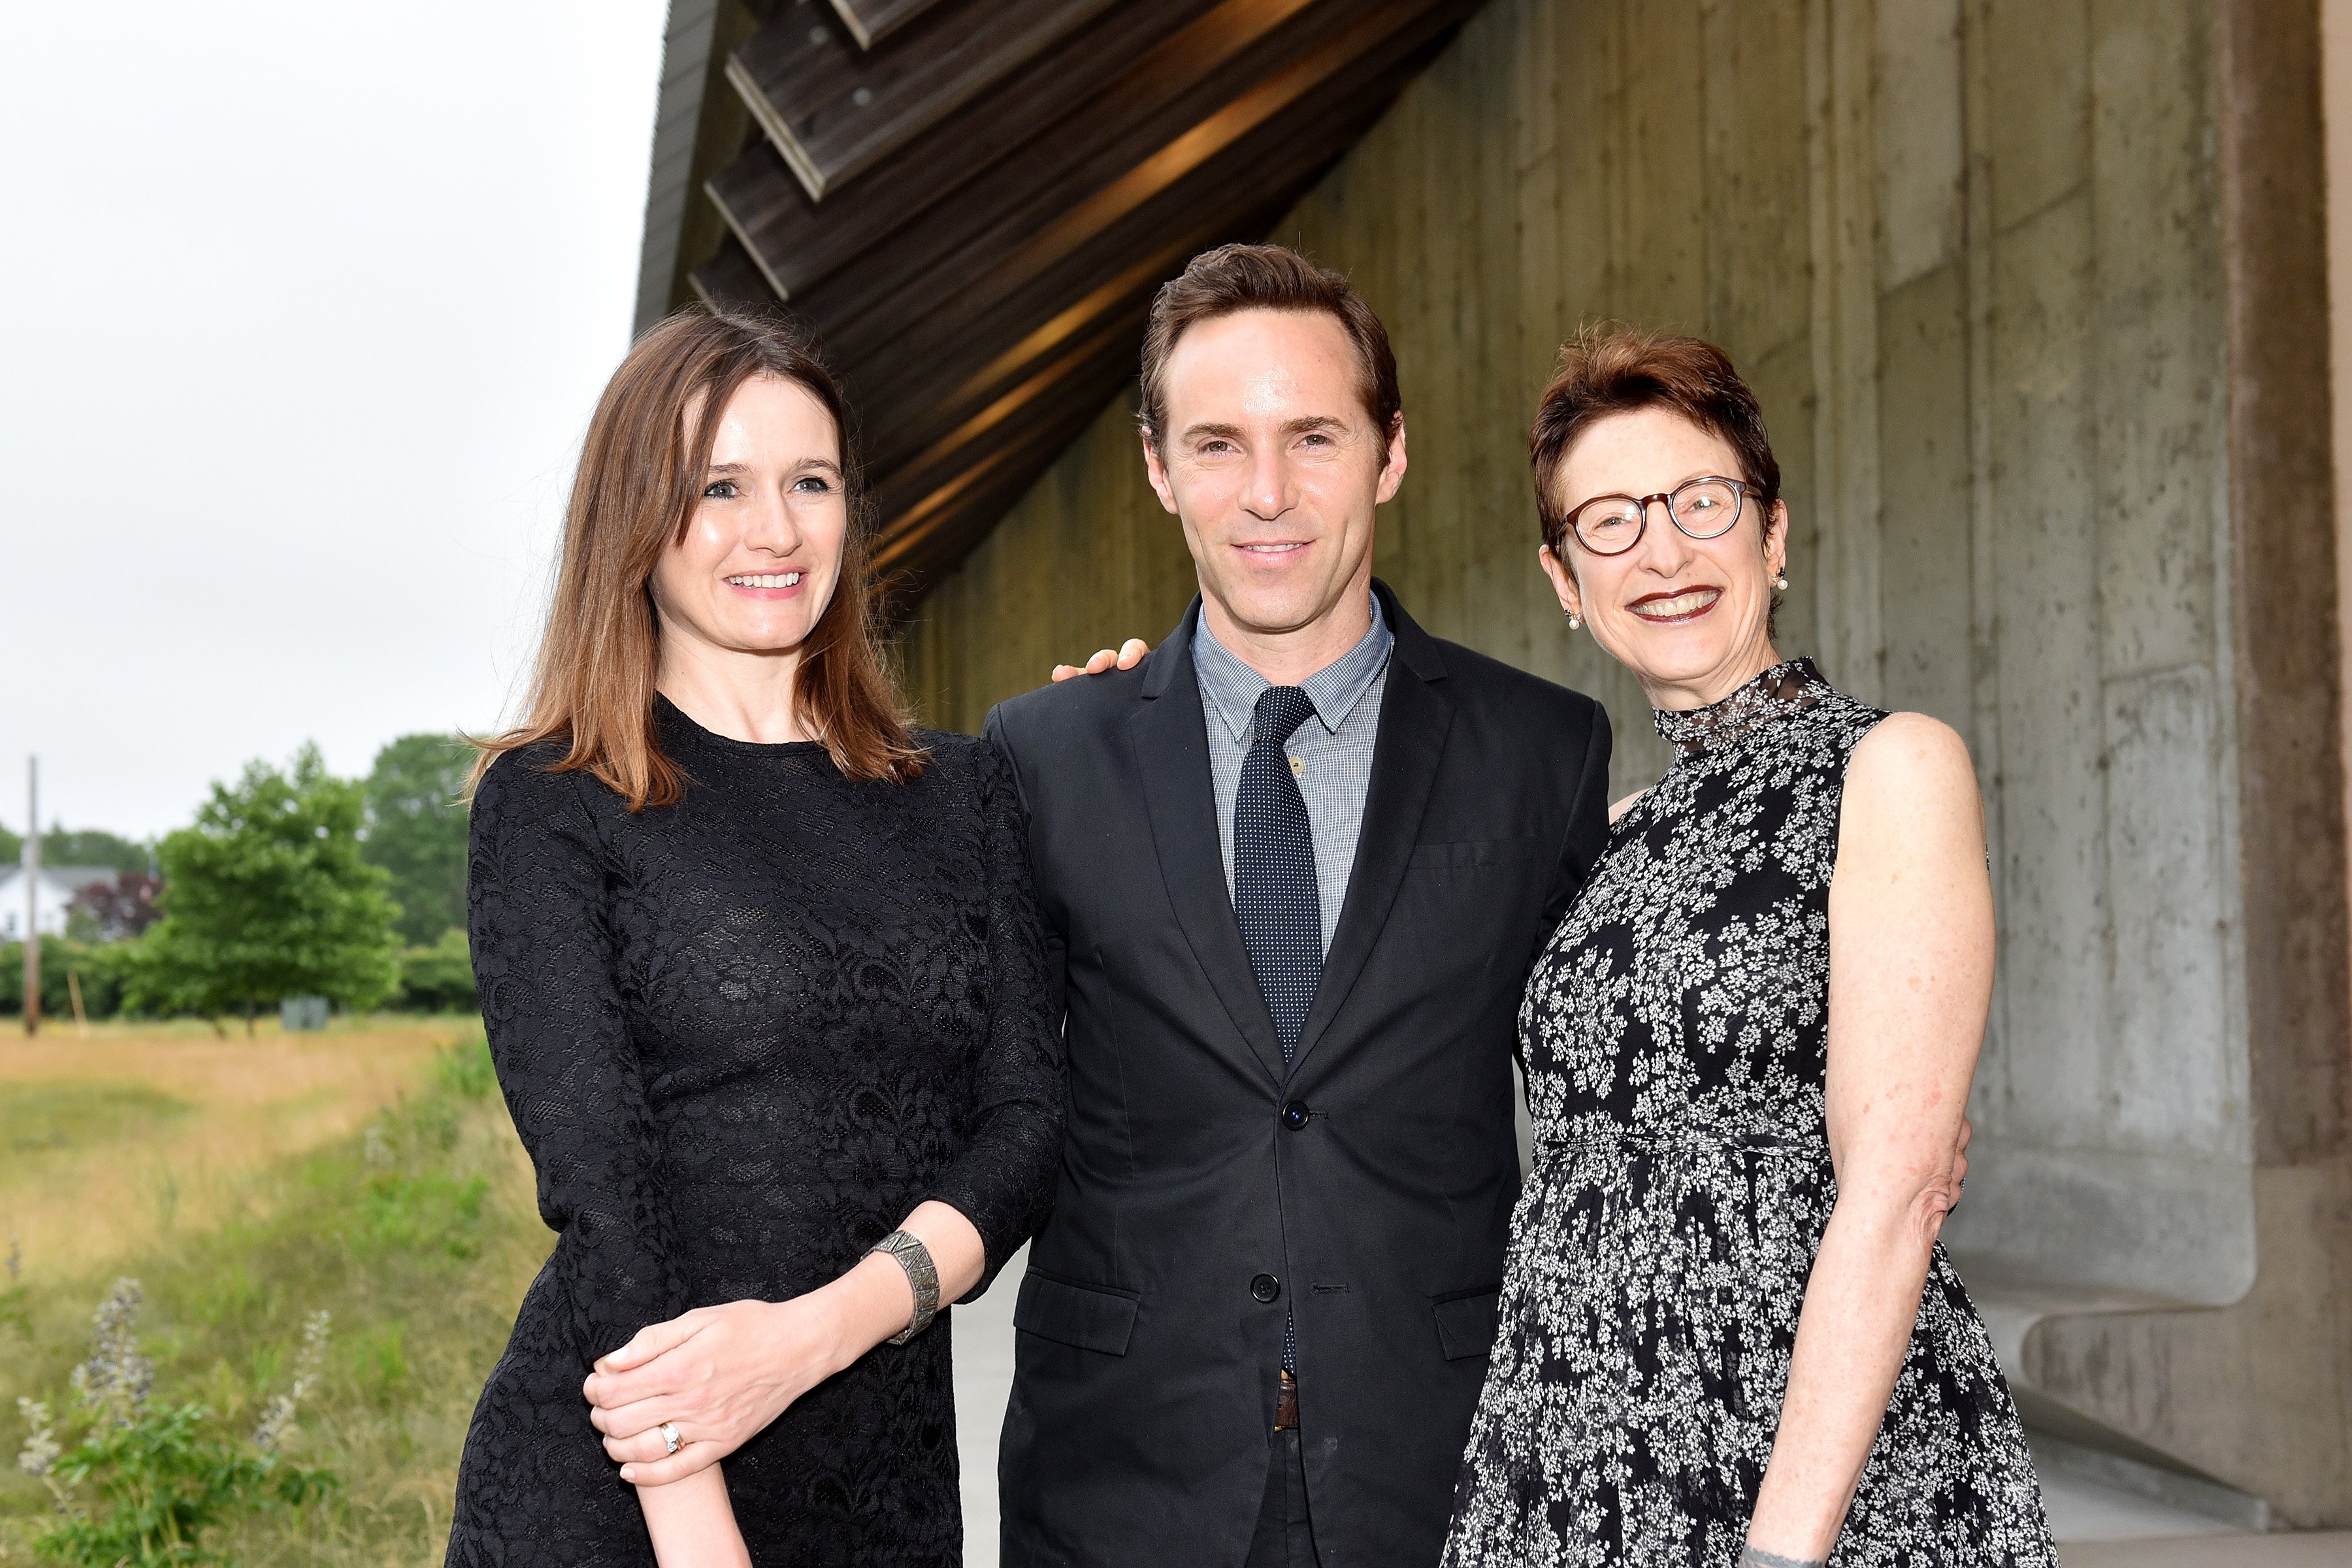 Emily Mortimer, Alessandro Nivola, Terrie Sultan at the Midsummer Party 2016 at the Parrish Art Museum. Courtesy of Patrick McMullan.